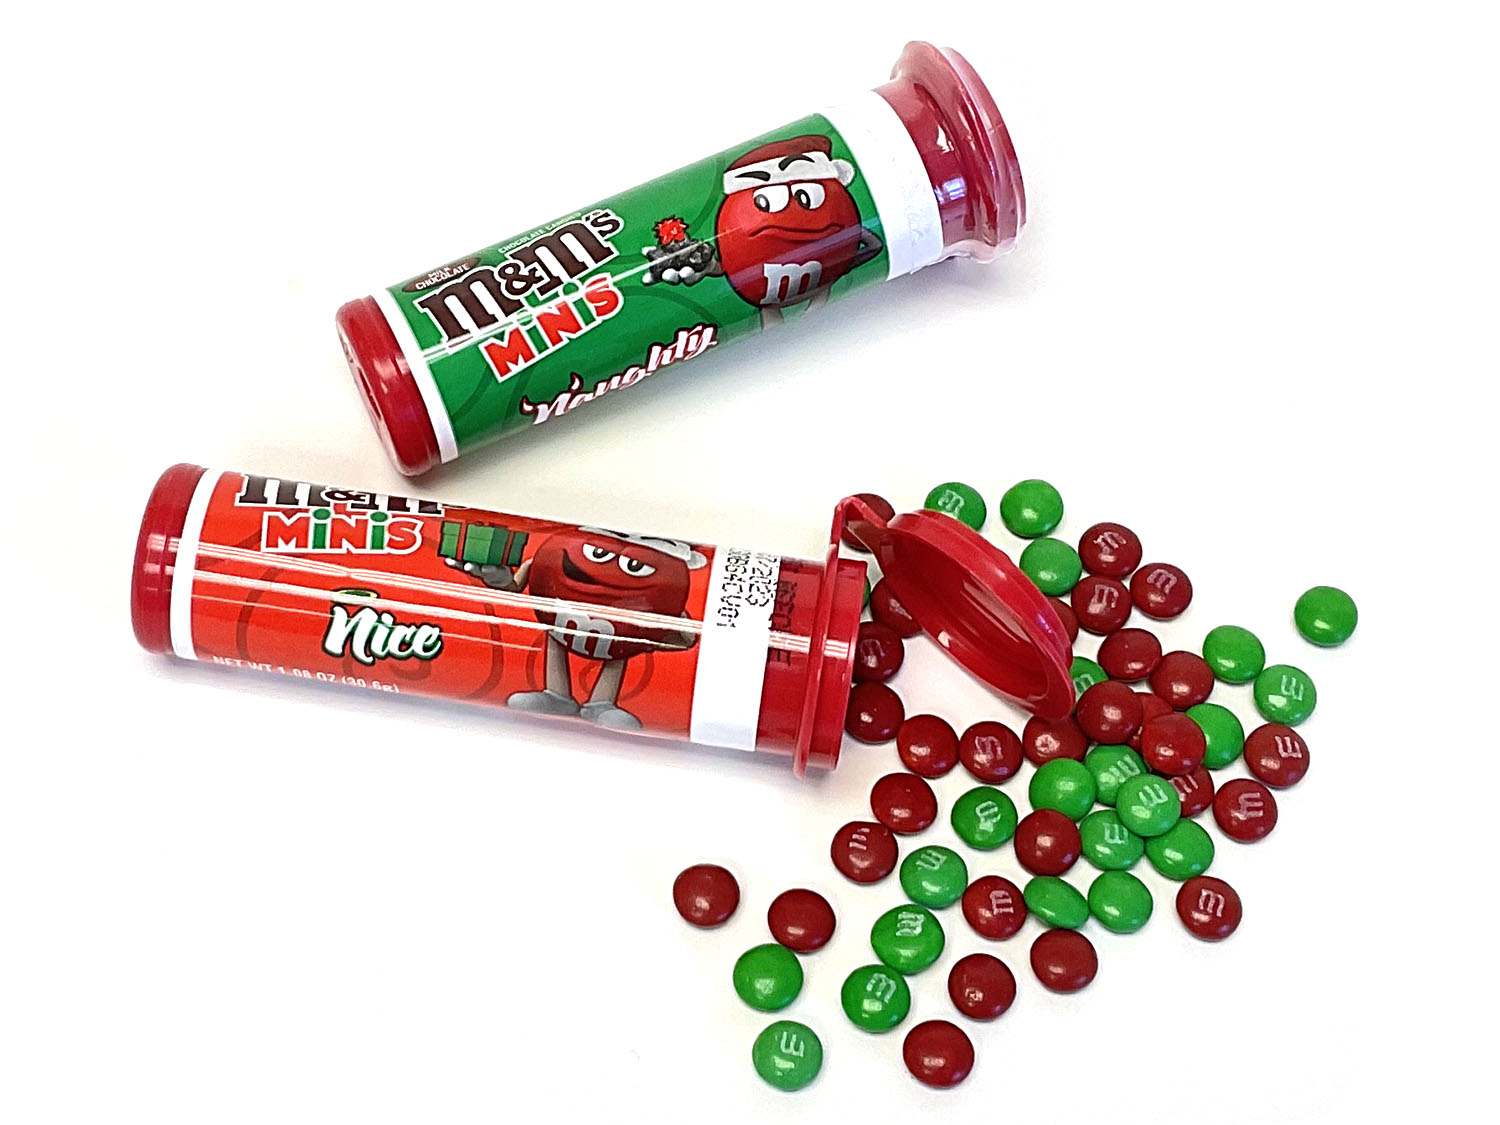 M&M's Holiday Milk Chocolate Minis Size Christmas Candy In Tubes